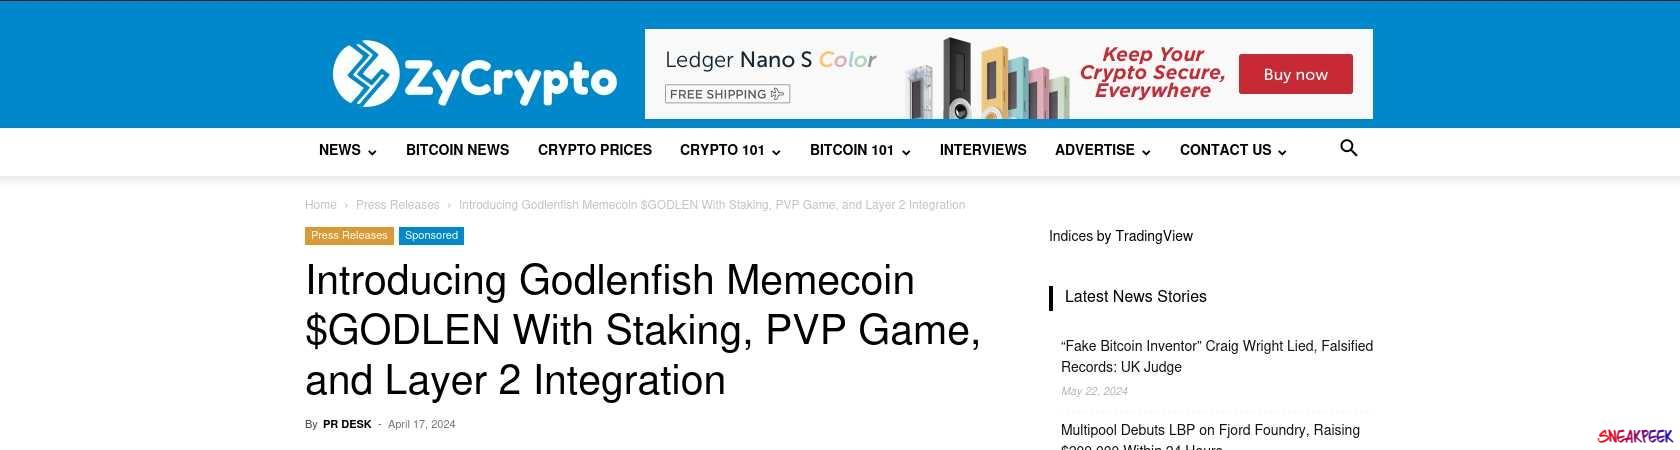 Read the full Article:  ⭲ Introducing Godlenfish Memecoin $GODLEN With Staking, PVP Game, and Layer 2 Integration